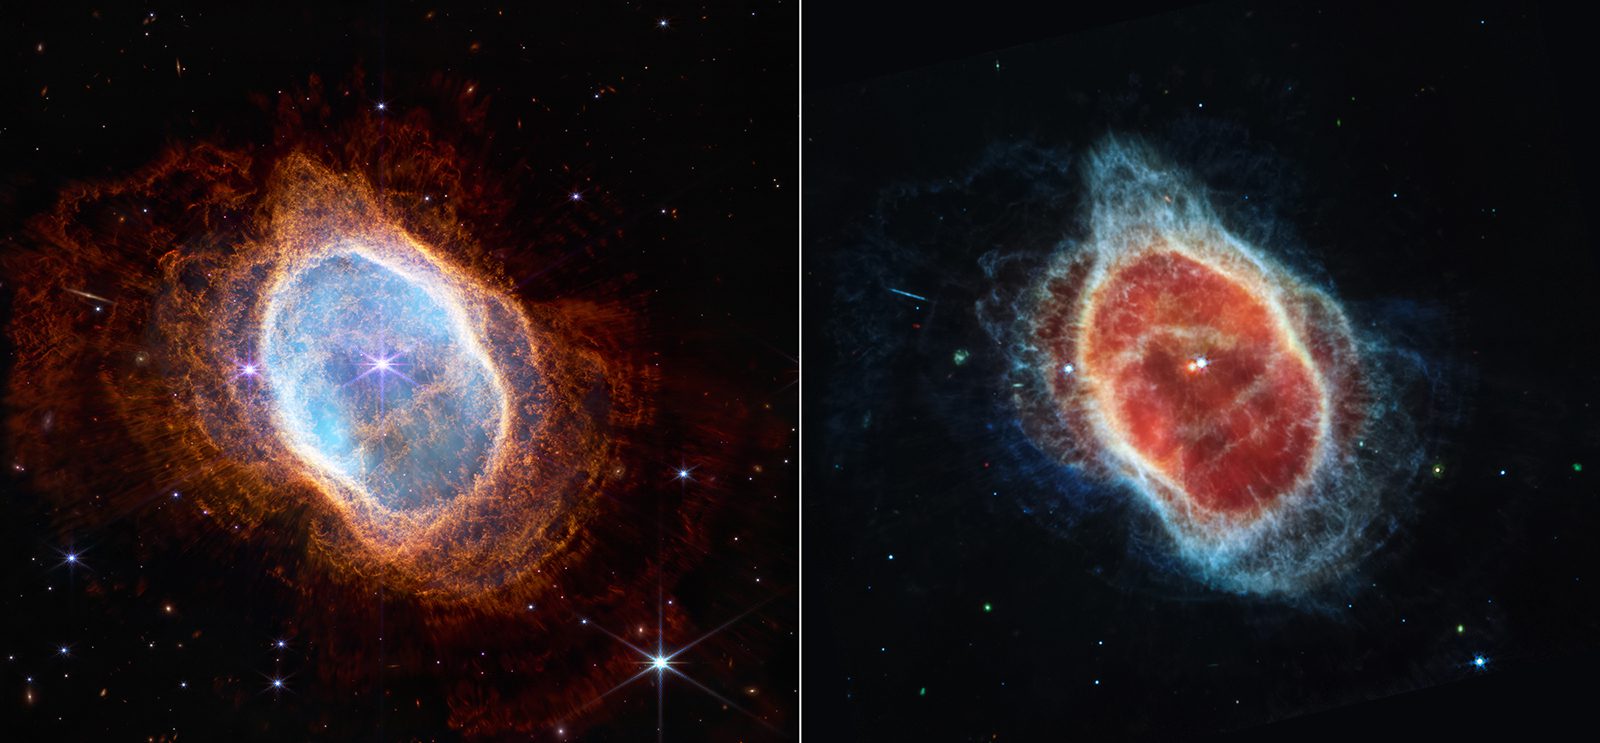 This side-by-side comparison shows observations of the Southern Ring Nebula in near-infrared light, at left, and mid-infrared light, at right, from NASA’s Webb Telescope. Image credit: NASA, ESA, CSA, and STScI